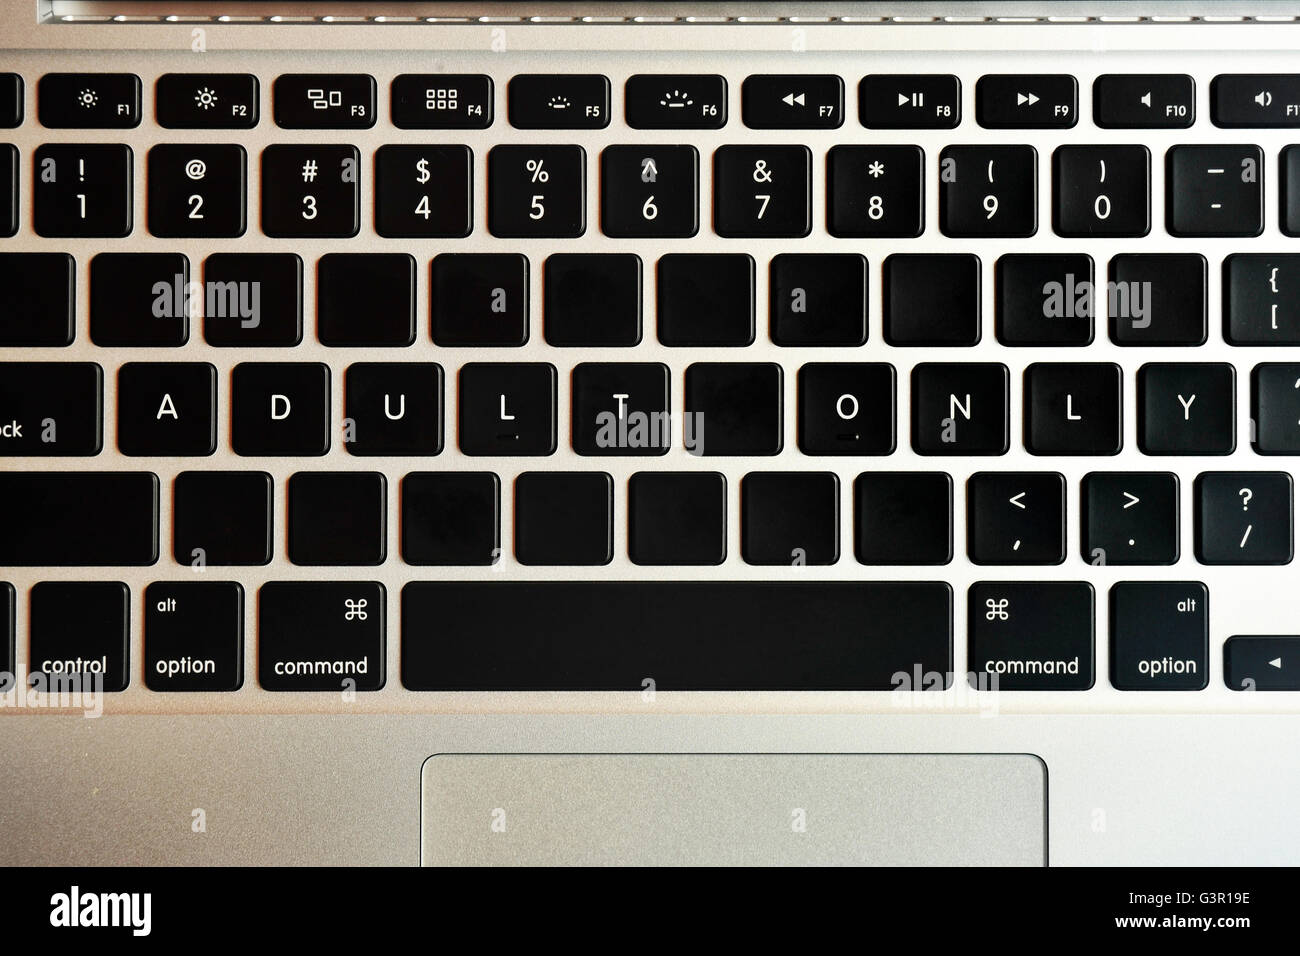 Adult Only written on the keyboard of a MacBook Pro. Stock Photo